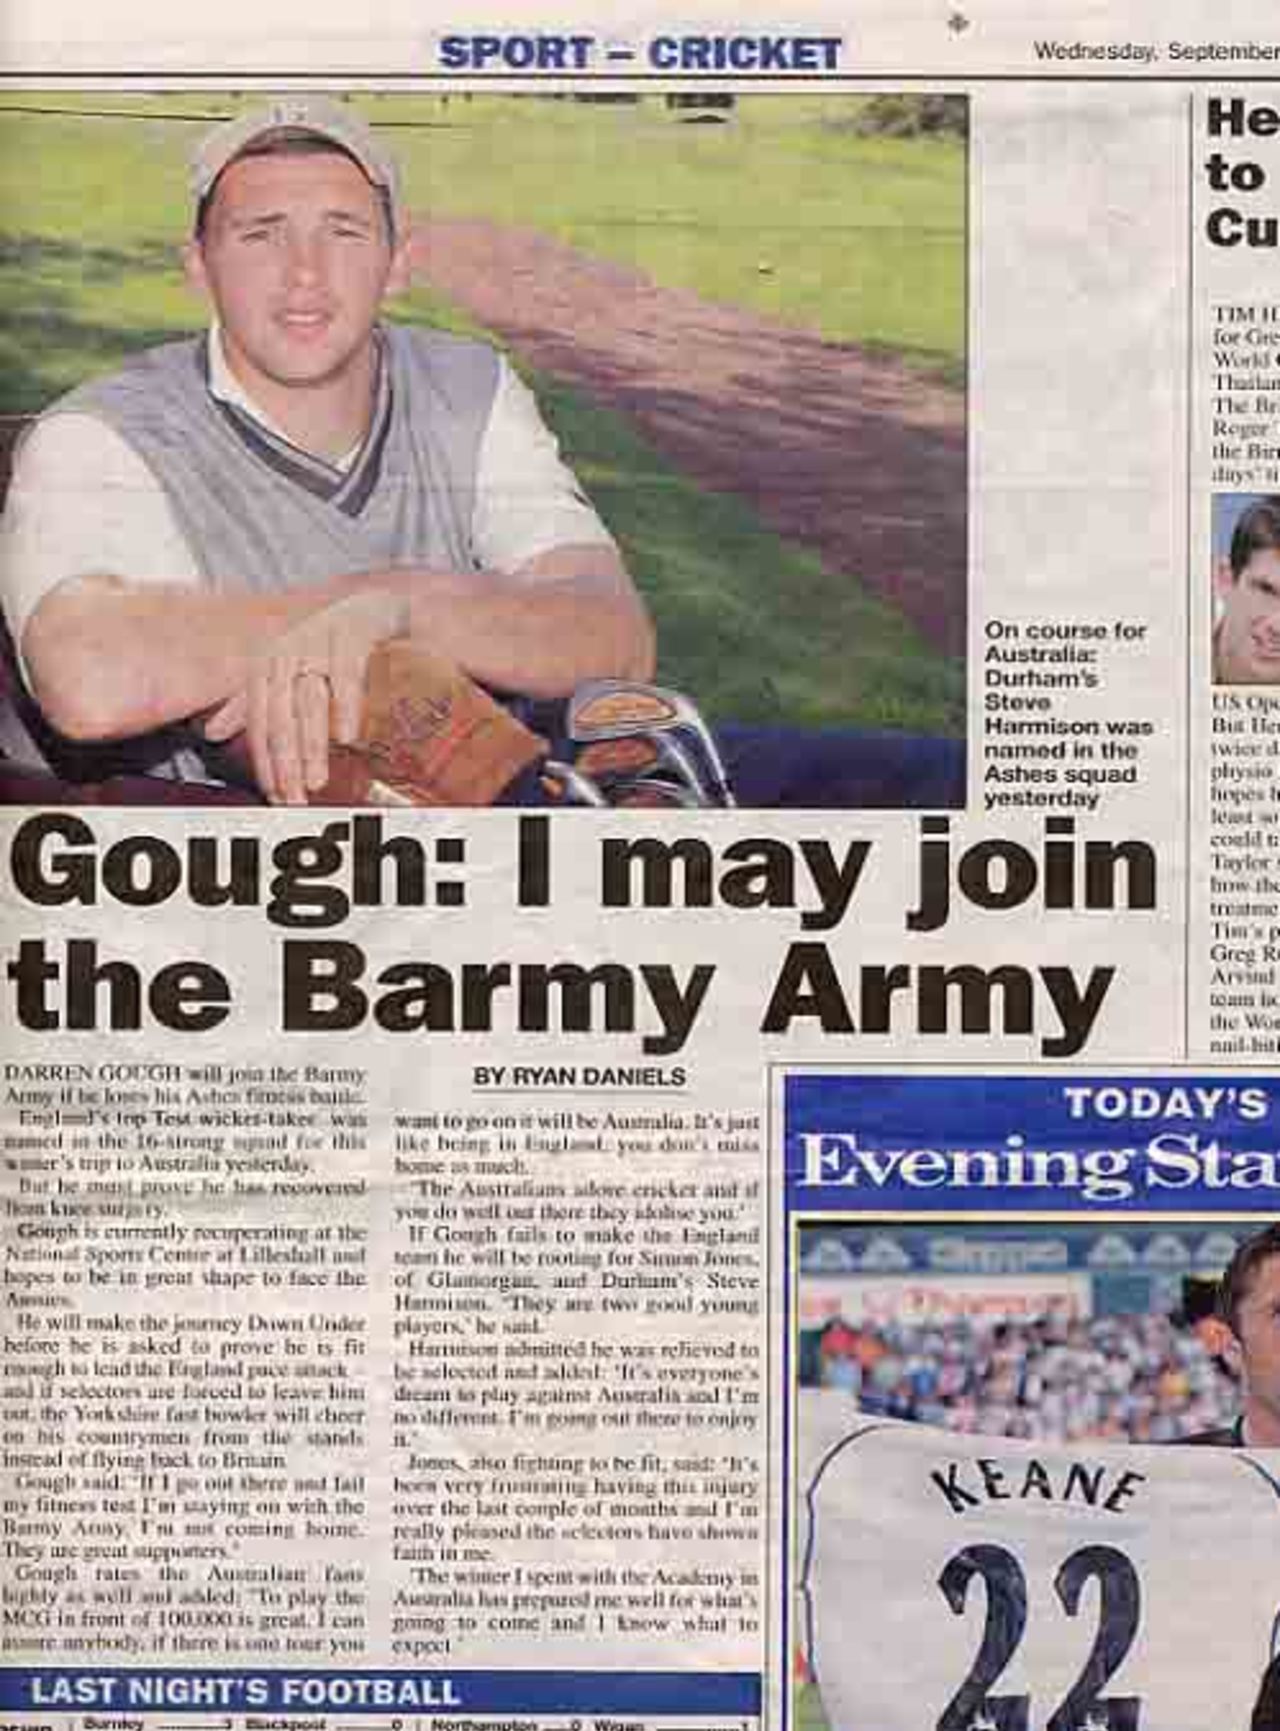 Gough may join the Barmy Army